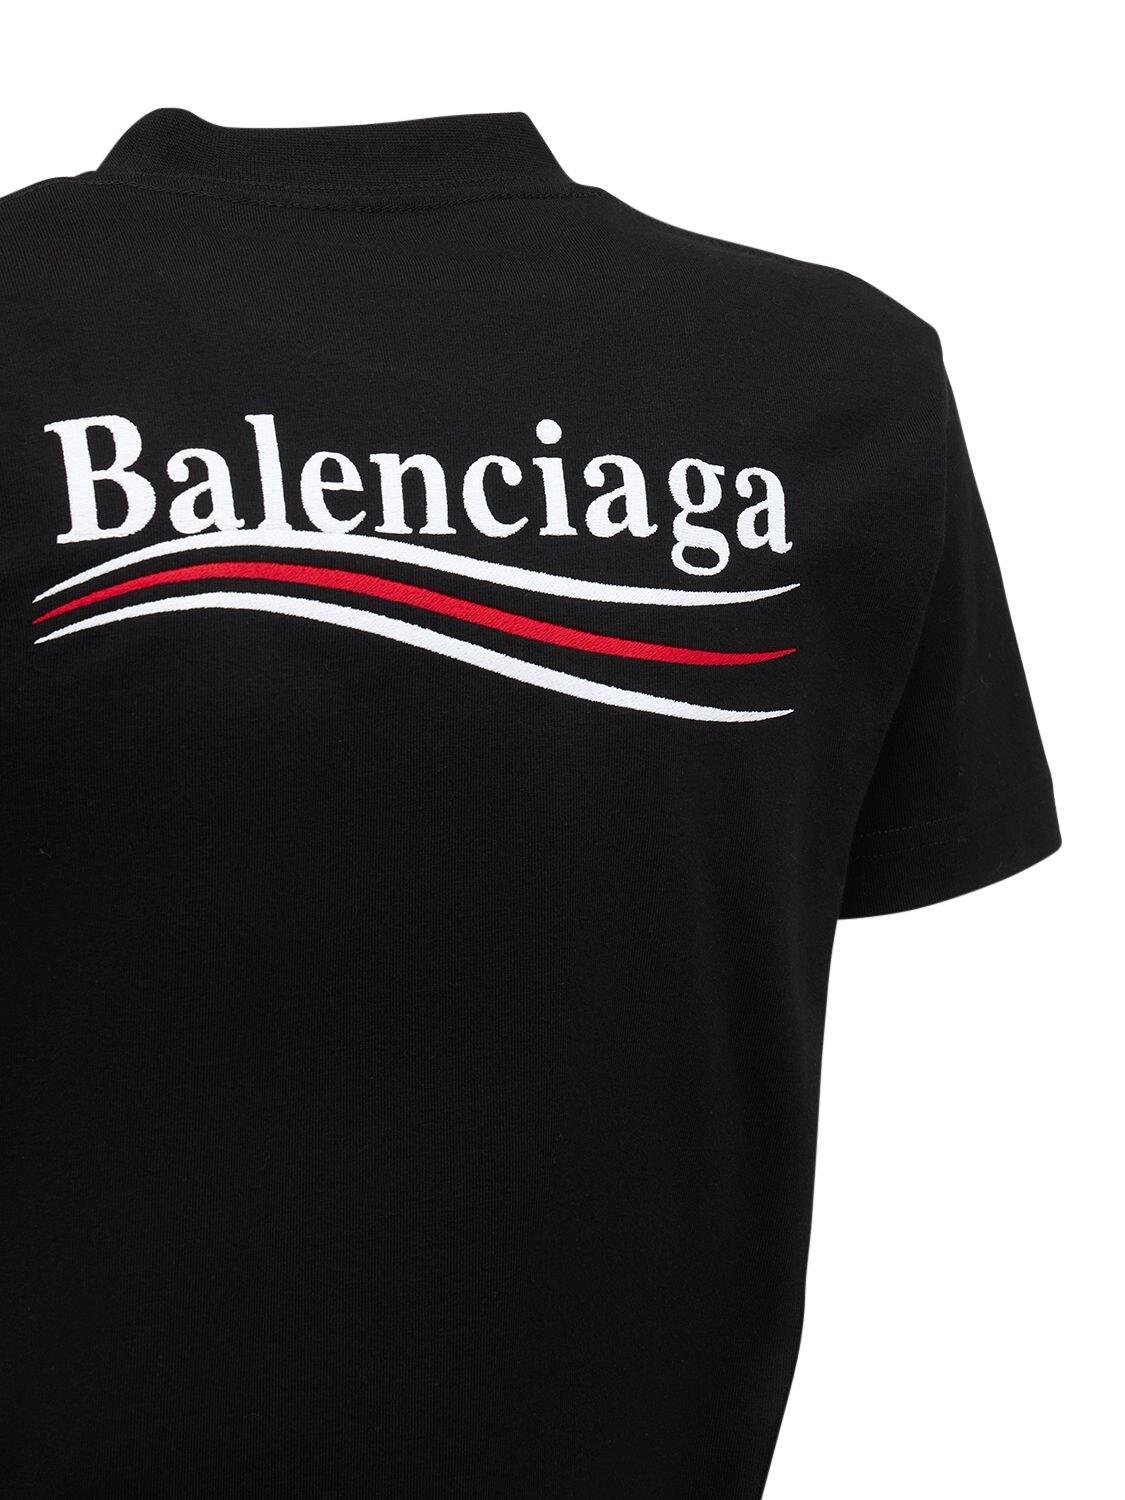 Balenciaga Slim Fit Embroidered Logo Cotton T-shirt in Black | Lyst